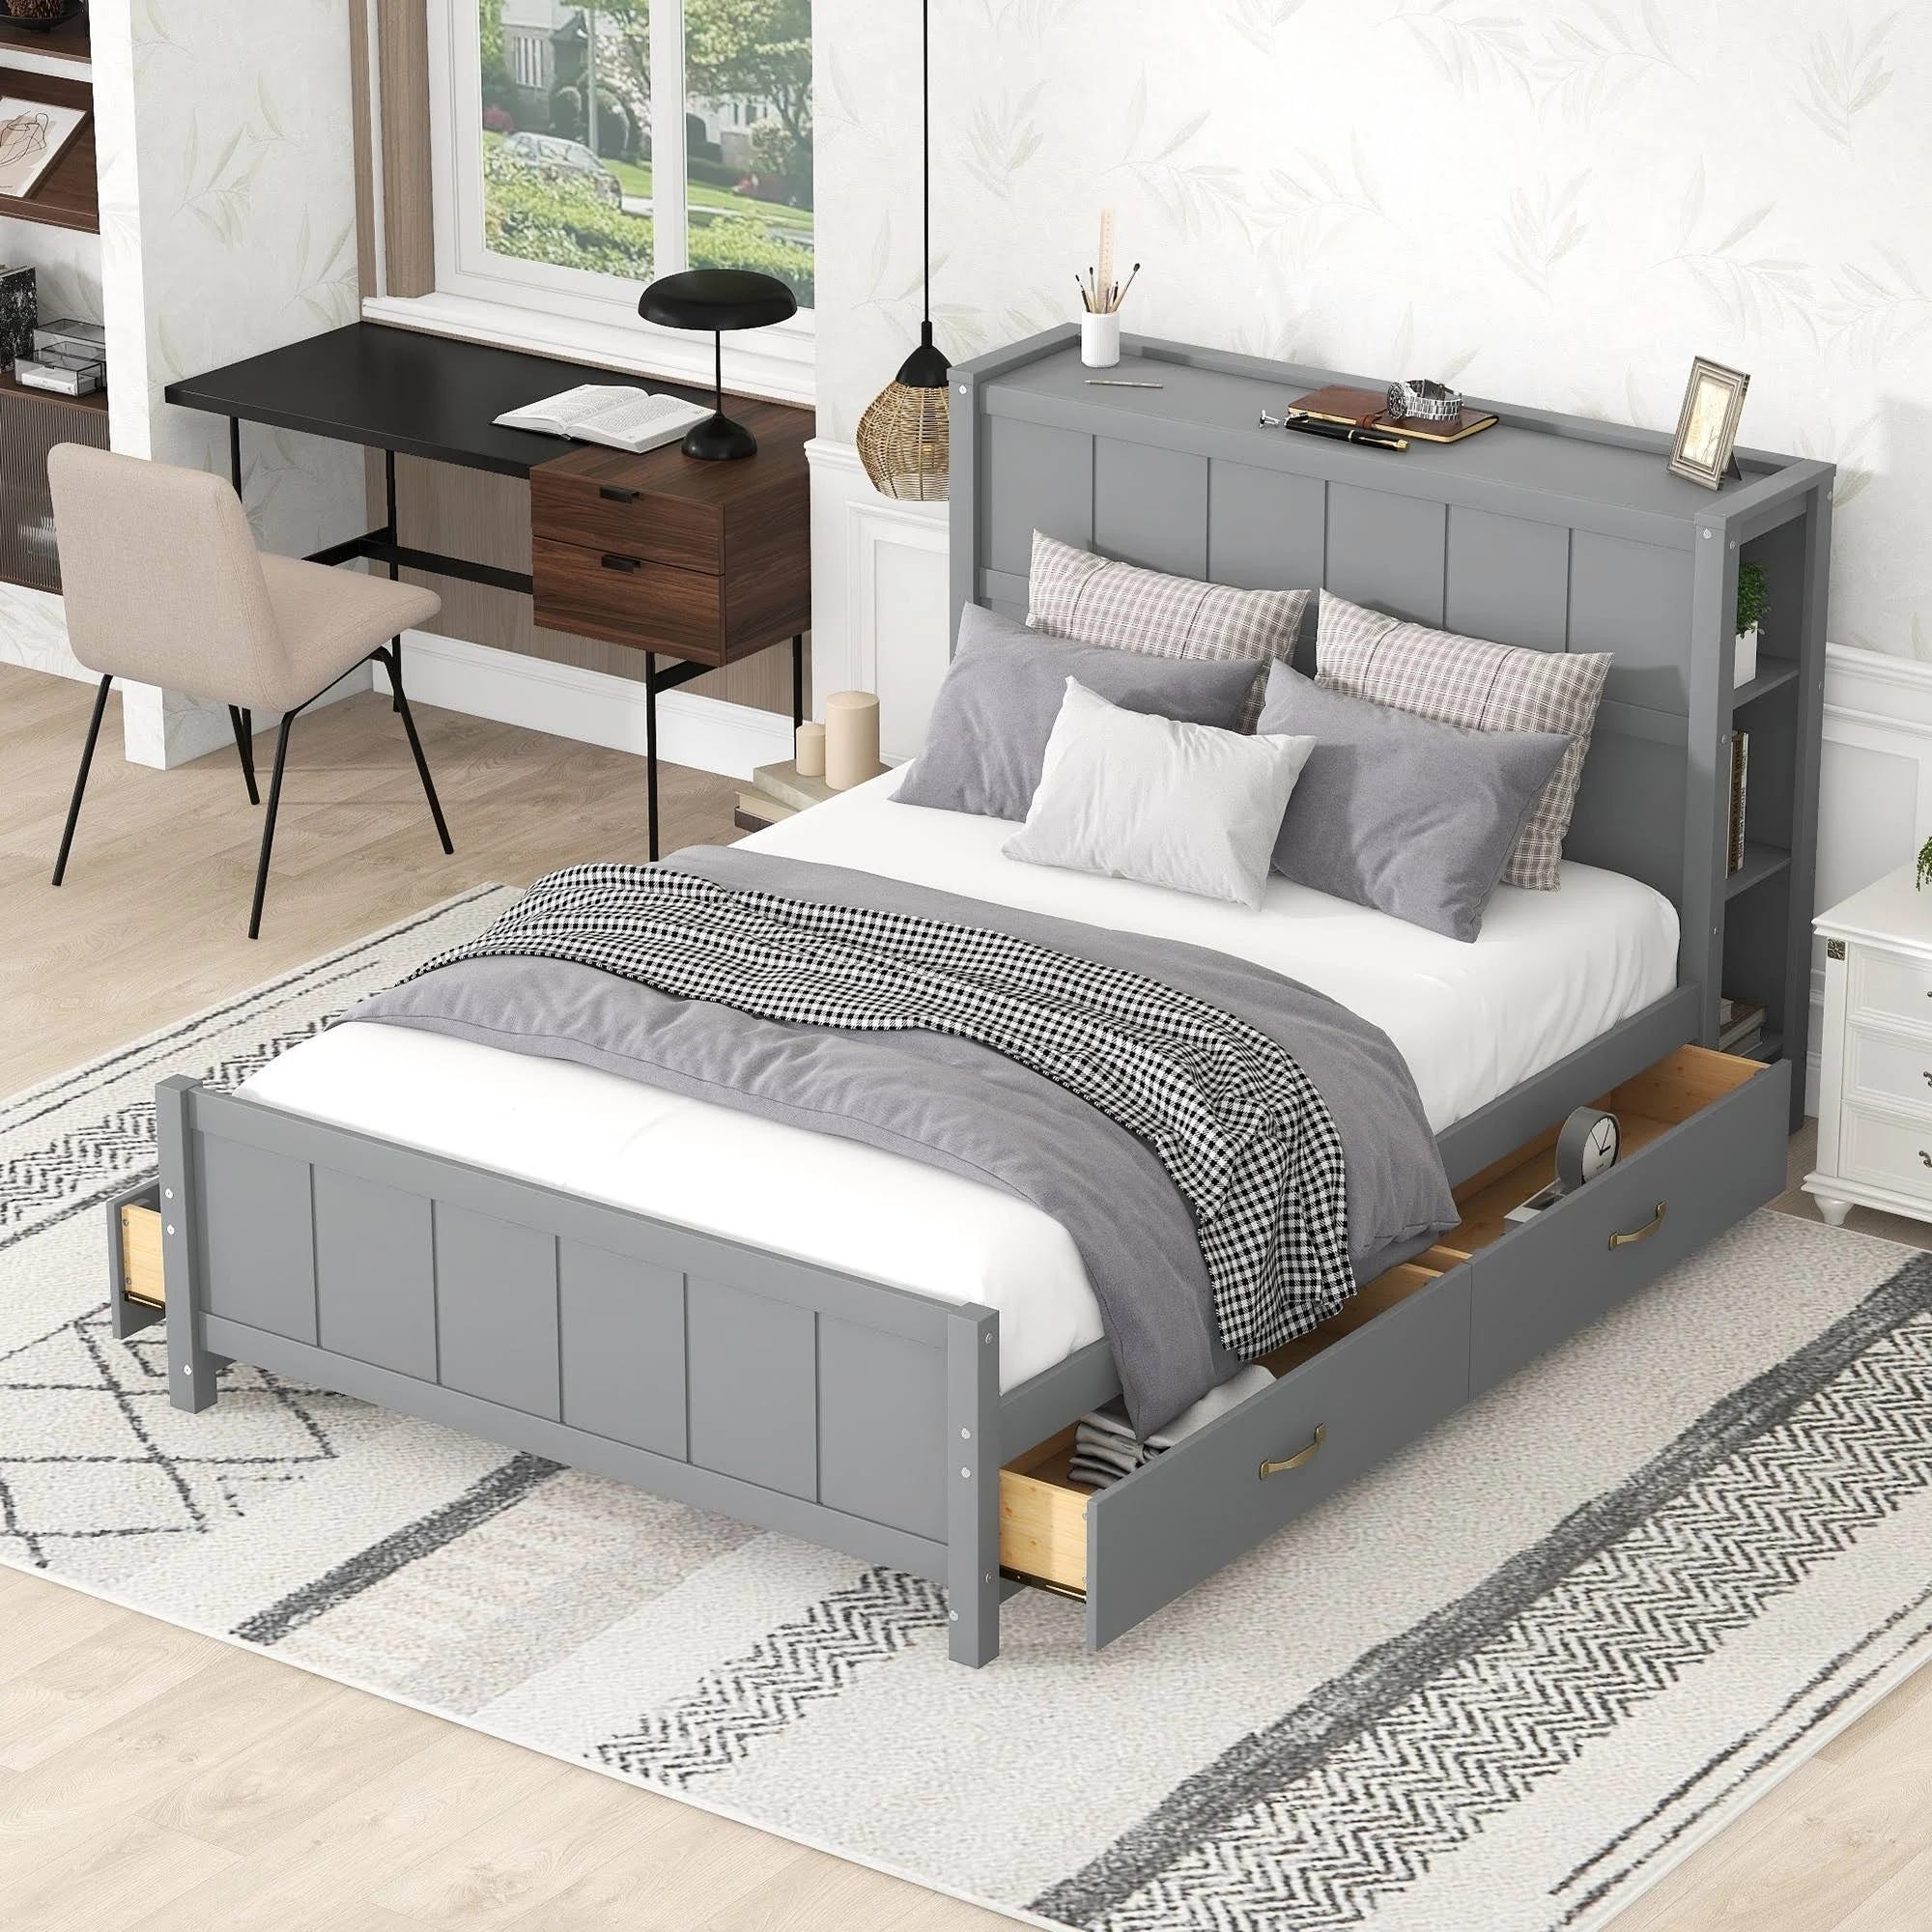 Modern Full Size Platform Bed with 4 Storage Drawers and Bookcase Headboard - Grey | Image